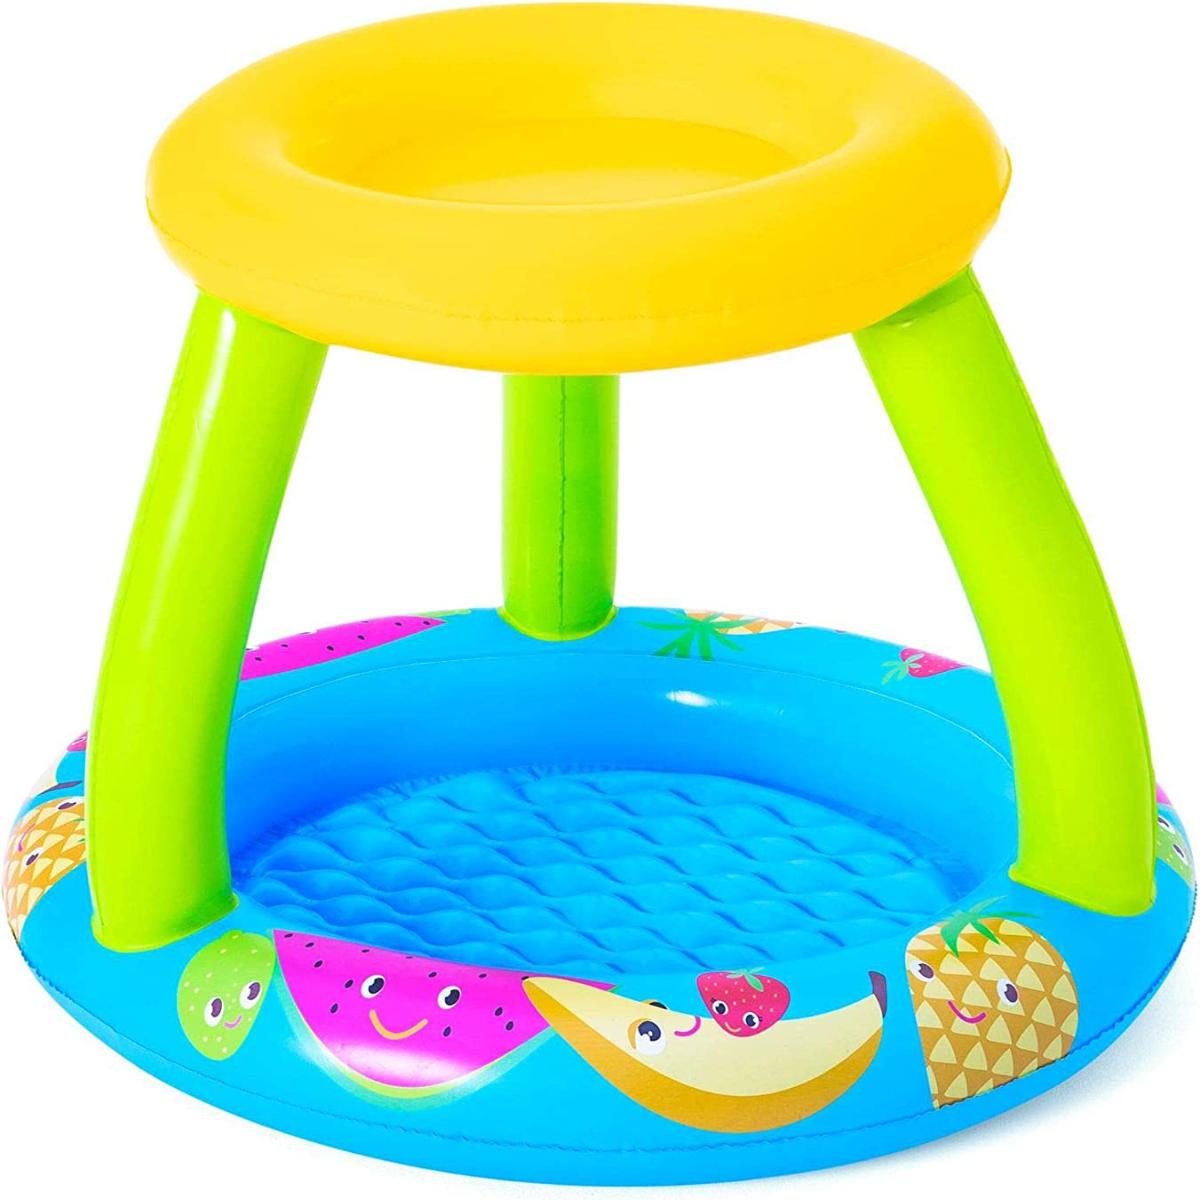 PISCINA INFLABLE P/BEBE